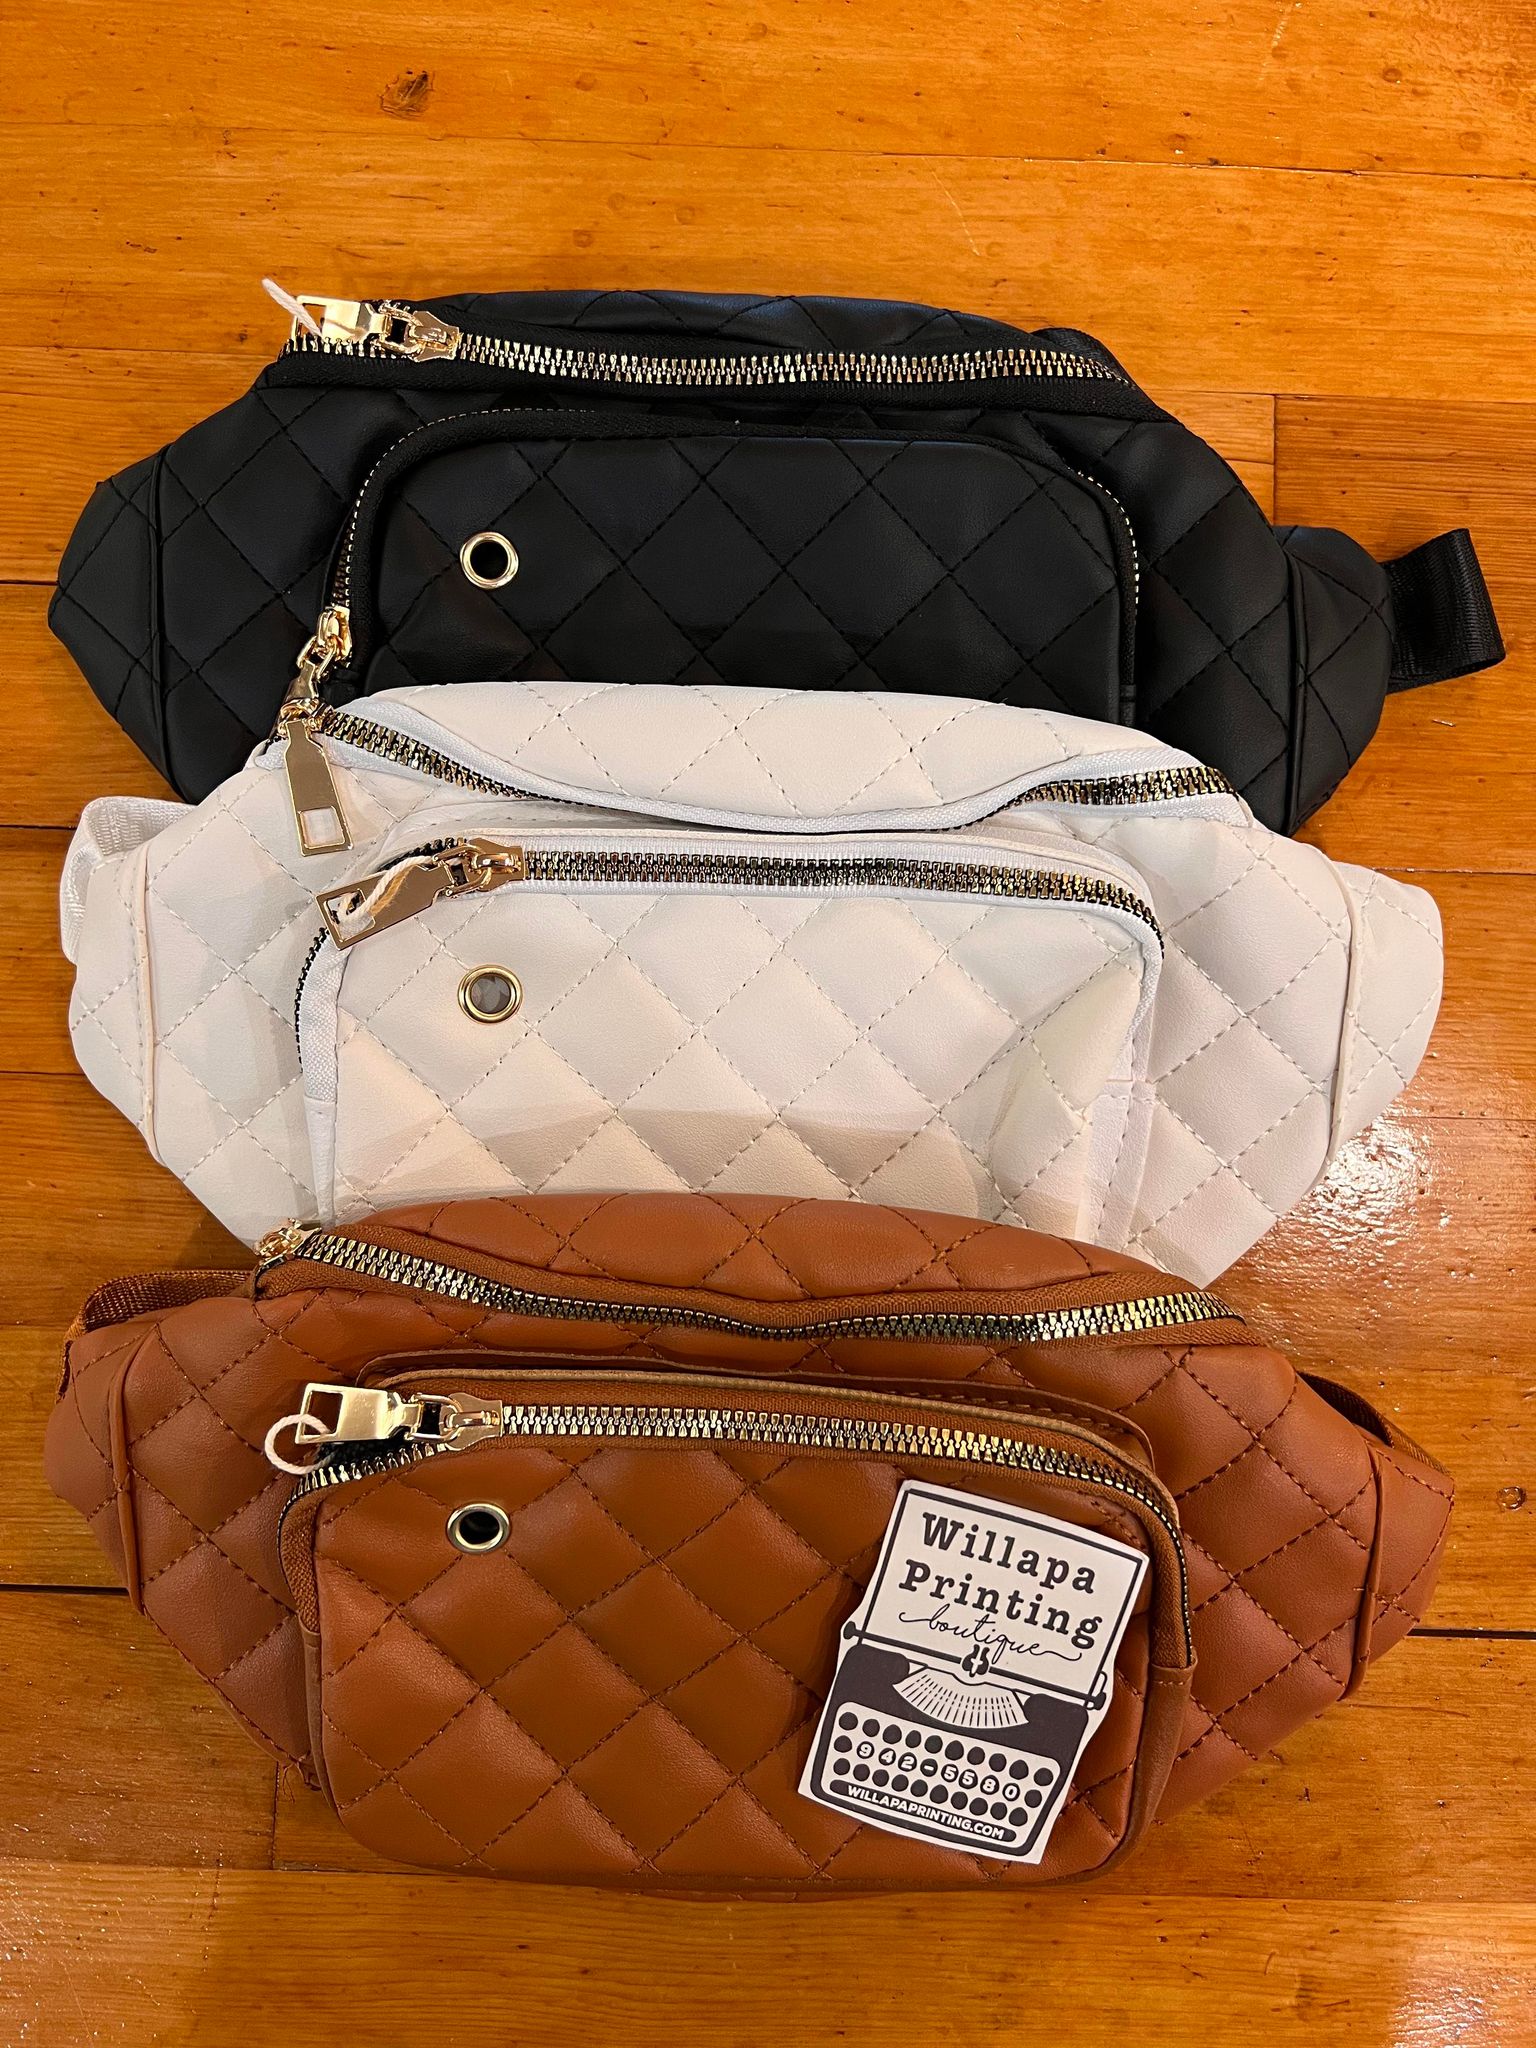 QUILTED SLING BUM BAG- 3 COLORS